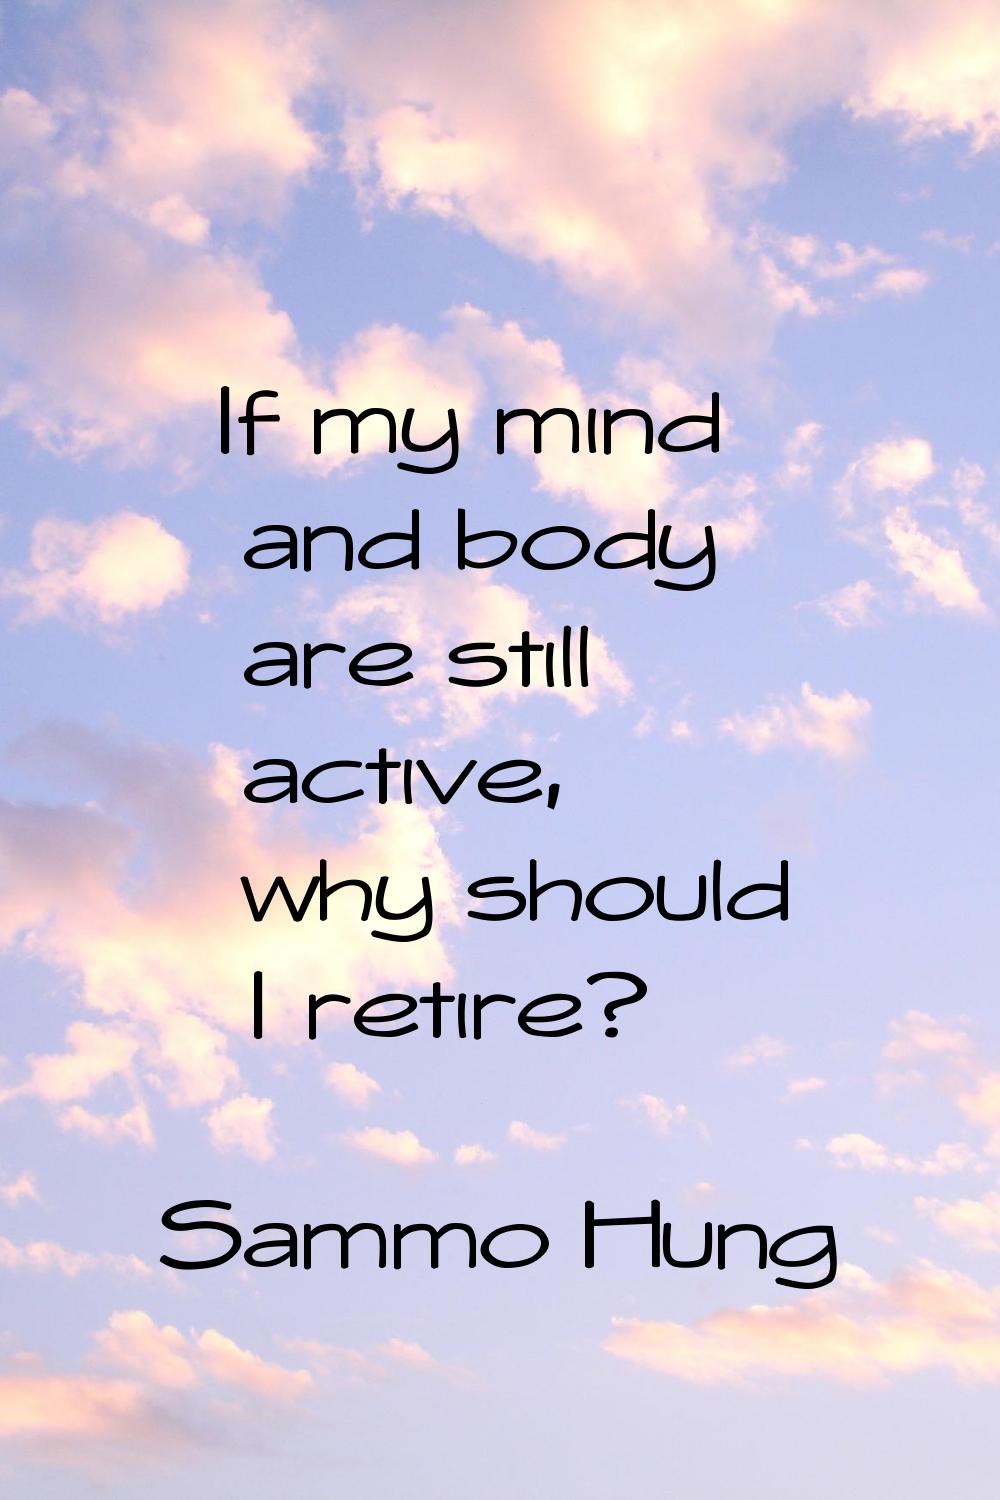 If my mind and body are still active, why should I retire?